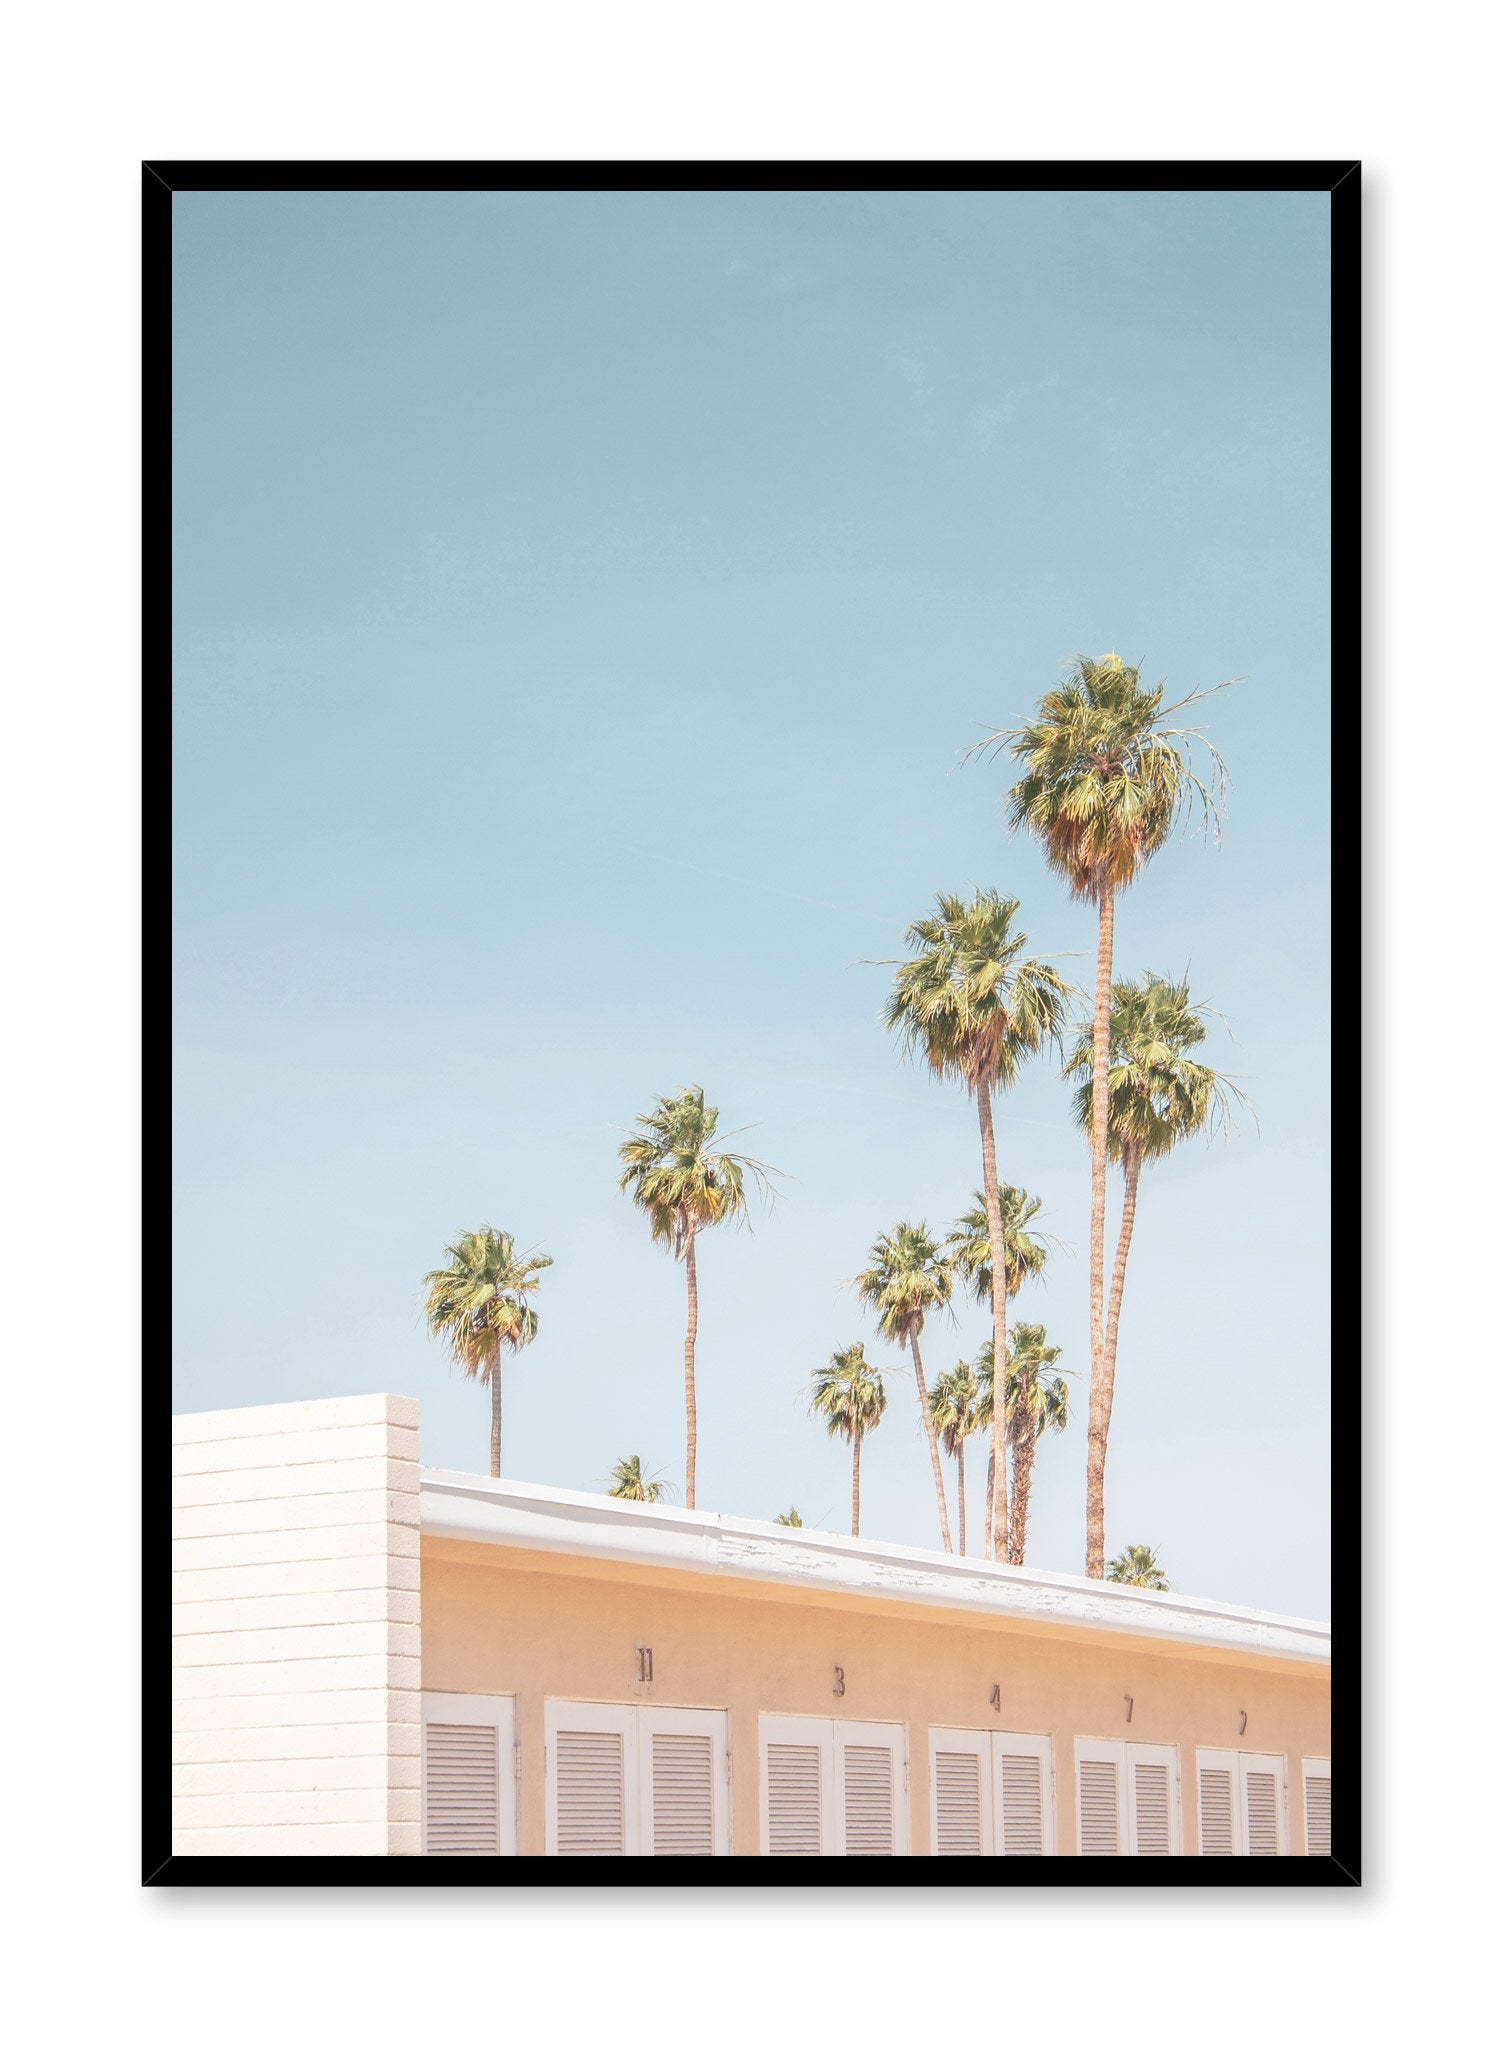 Modern minimalist poster by Opposite Wall with photography of palm trees and building.